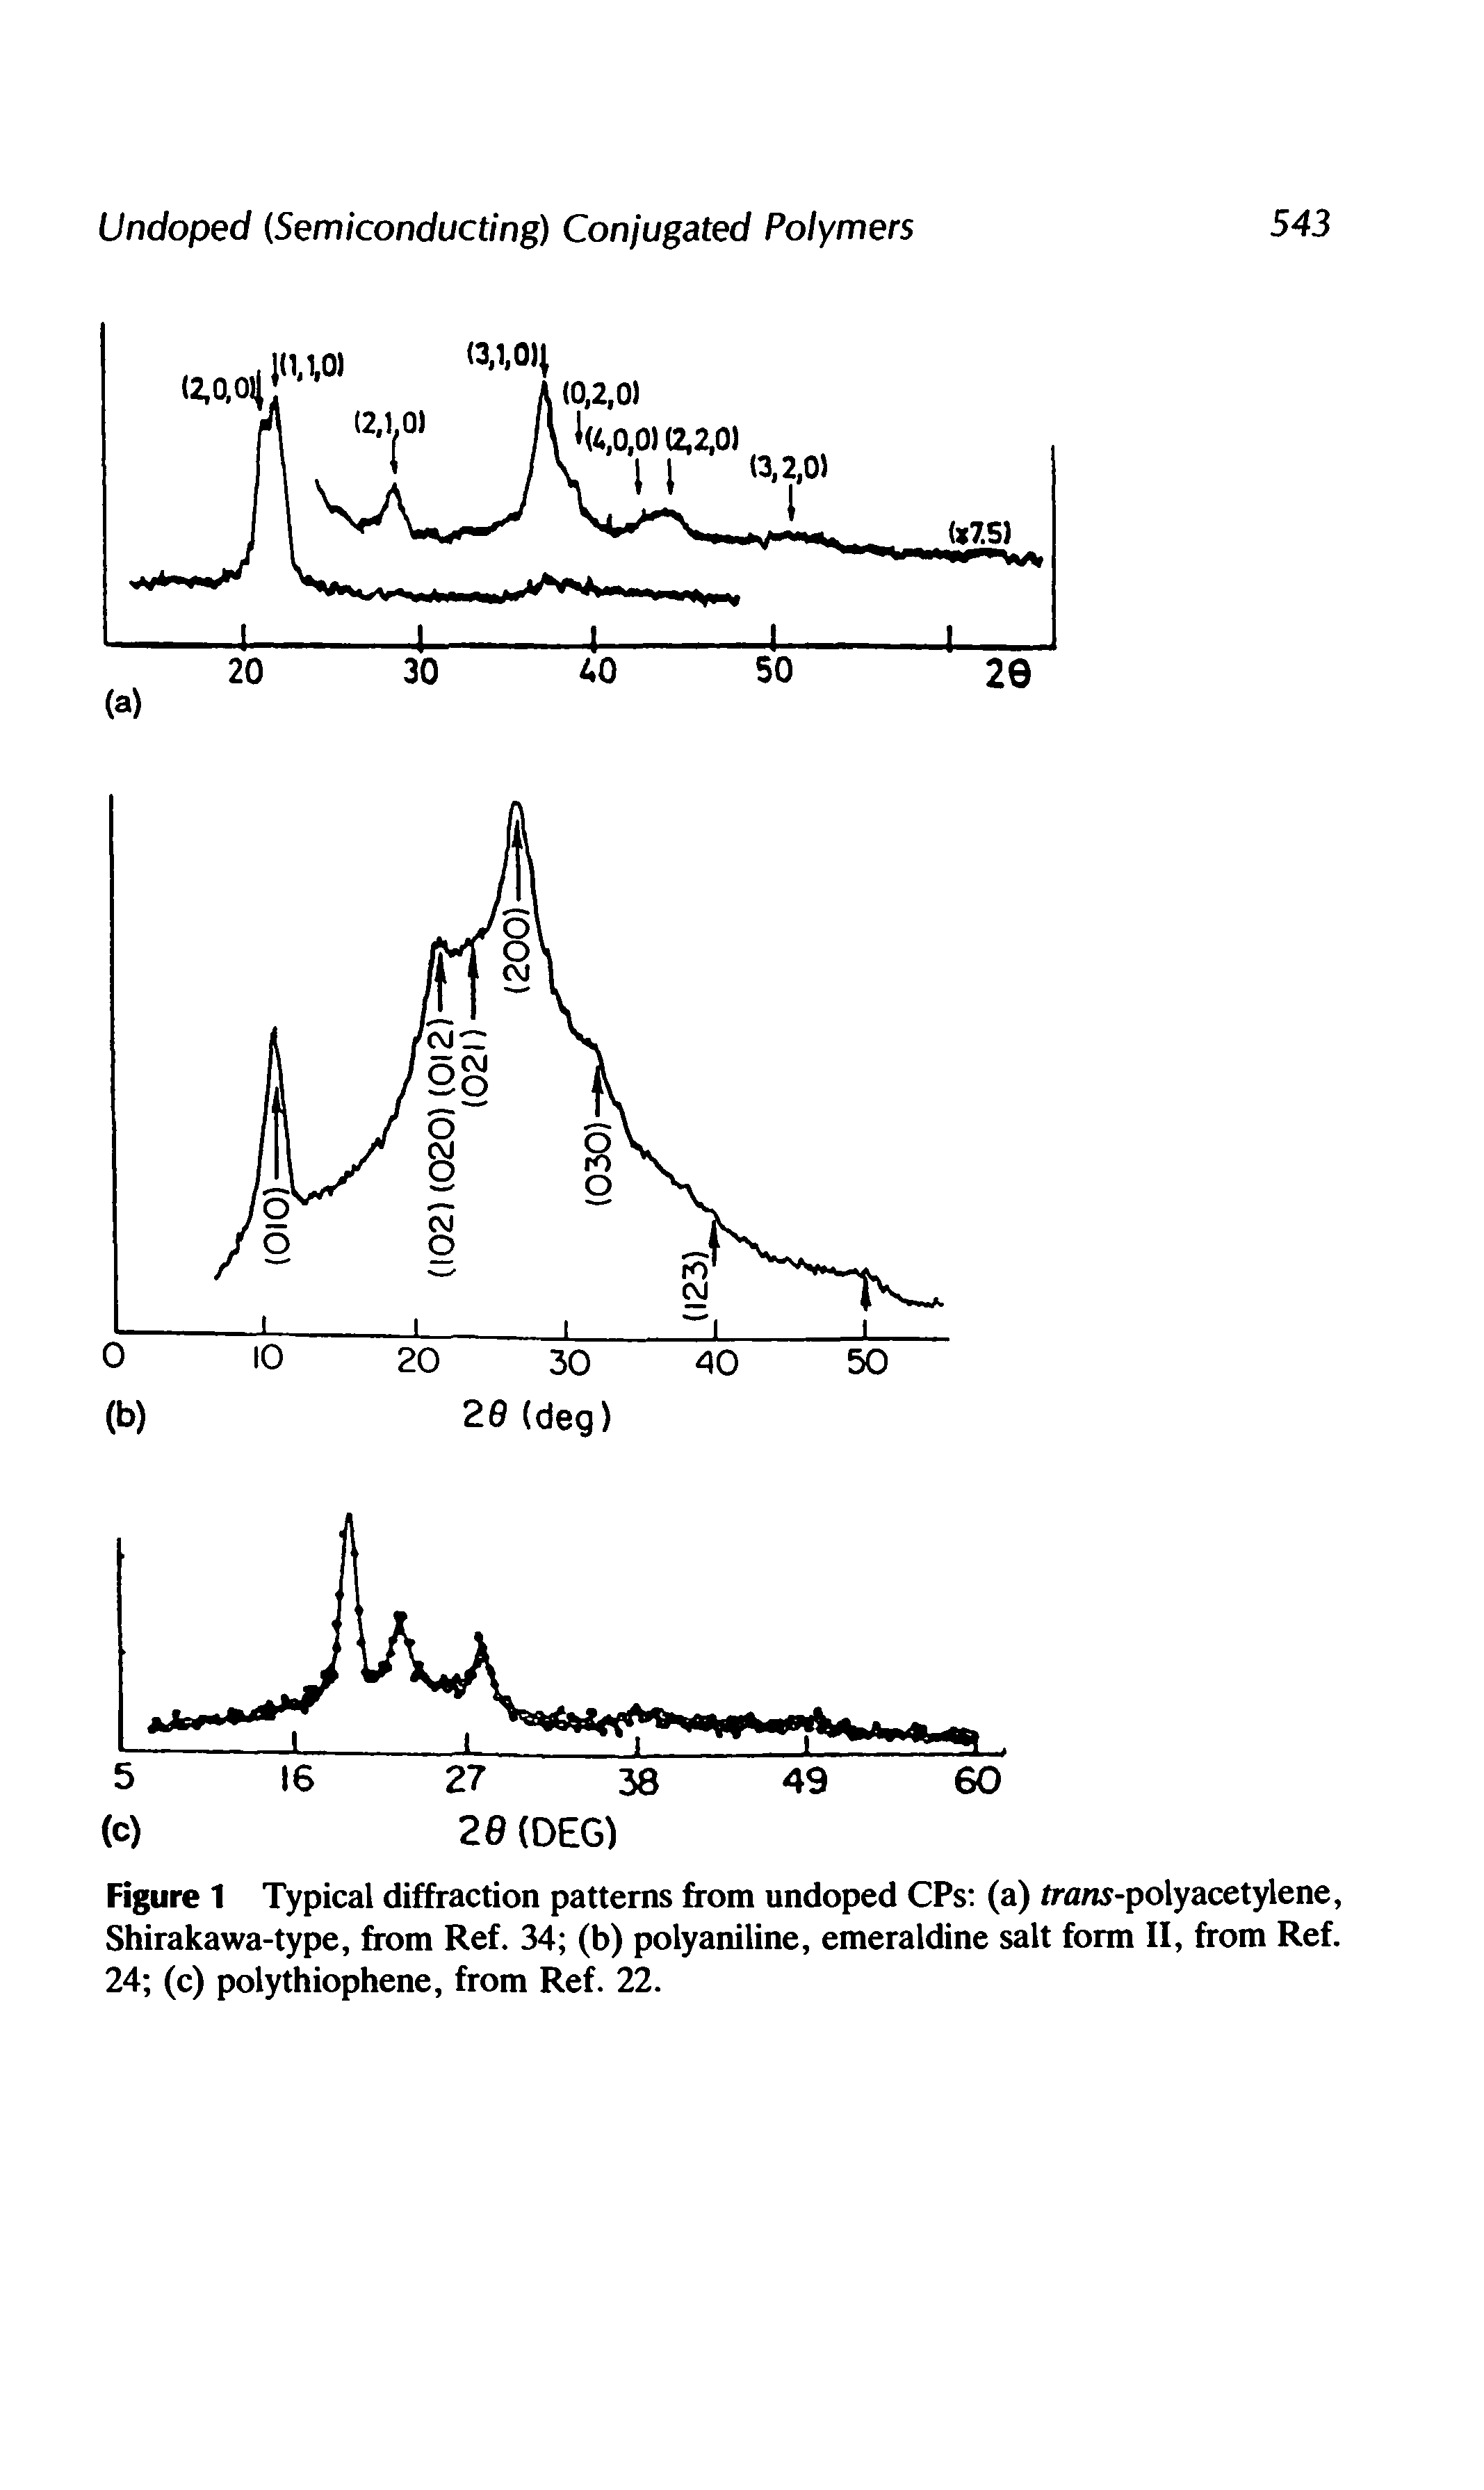 Figure 1 Typical diffraction patterns from undoped CPs (a) frms-polyacetylene, Shirakawa-type, from Ref. 34 (b) polyaniline, emeraldine salt form II, from Ref. 24 (c) polythiophene, from Ref. 22.